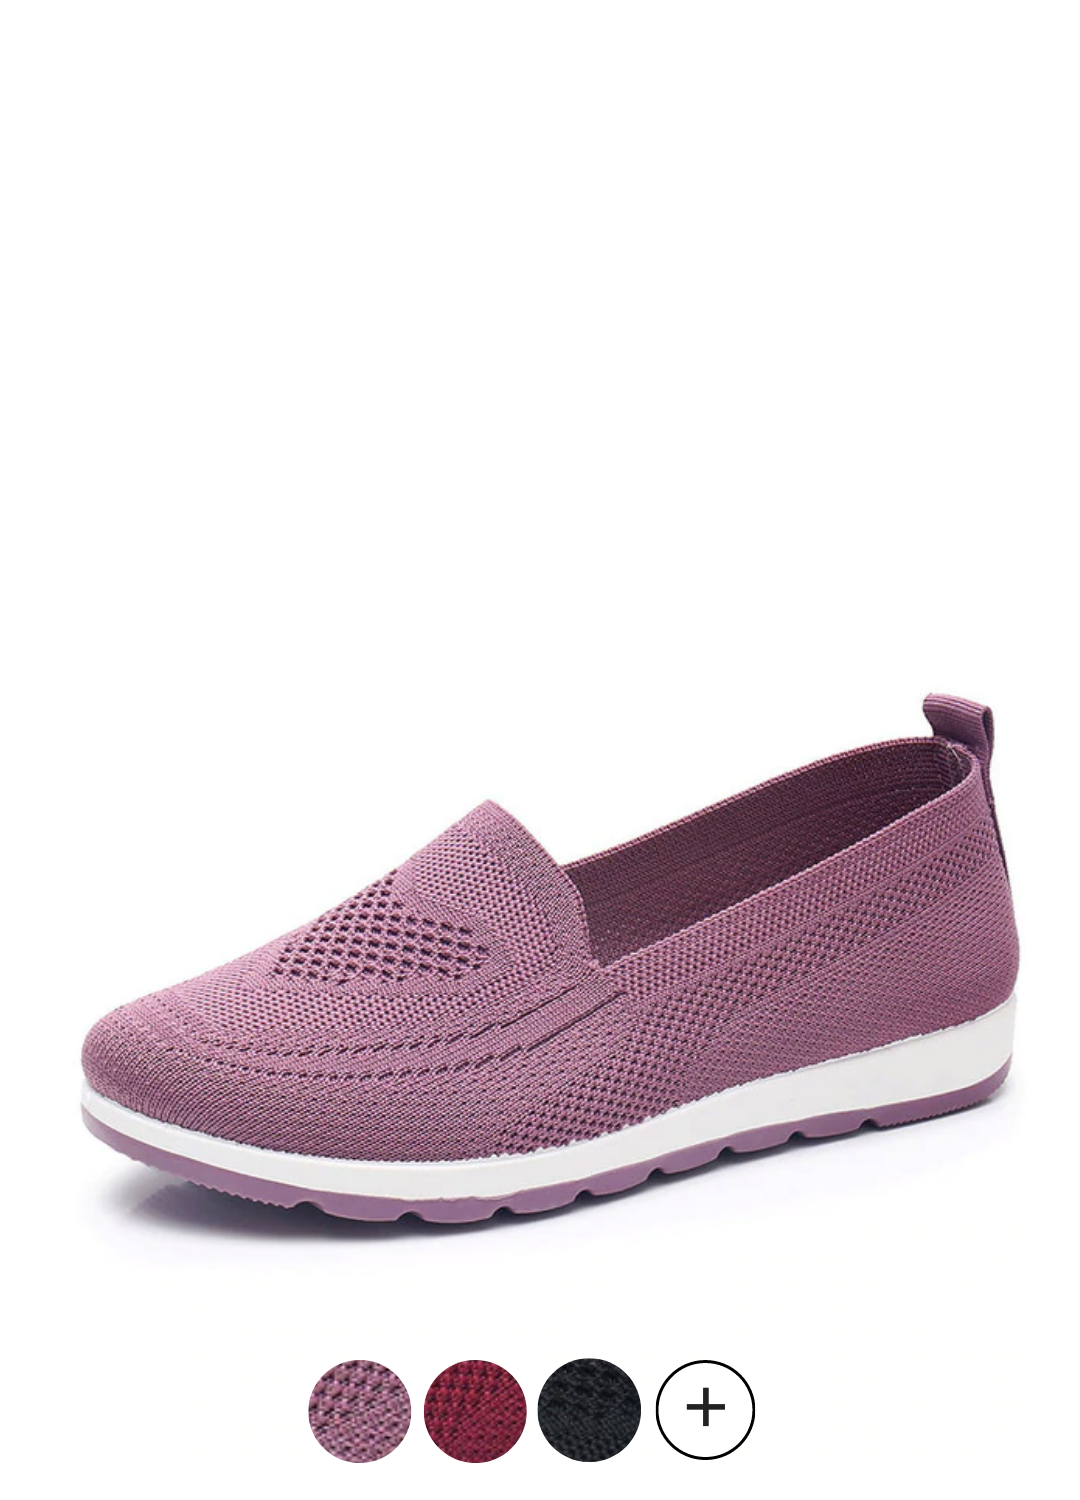 Isaura Women's Loafer Shoes | Ultrasellershoes.com – USS® Shoes